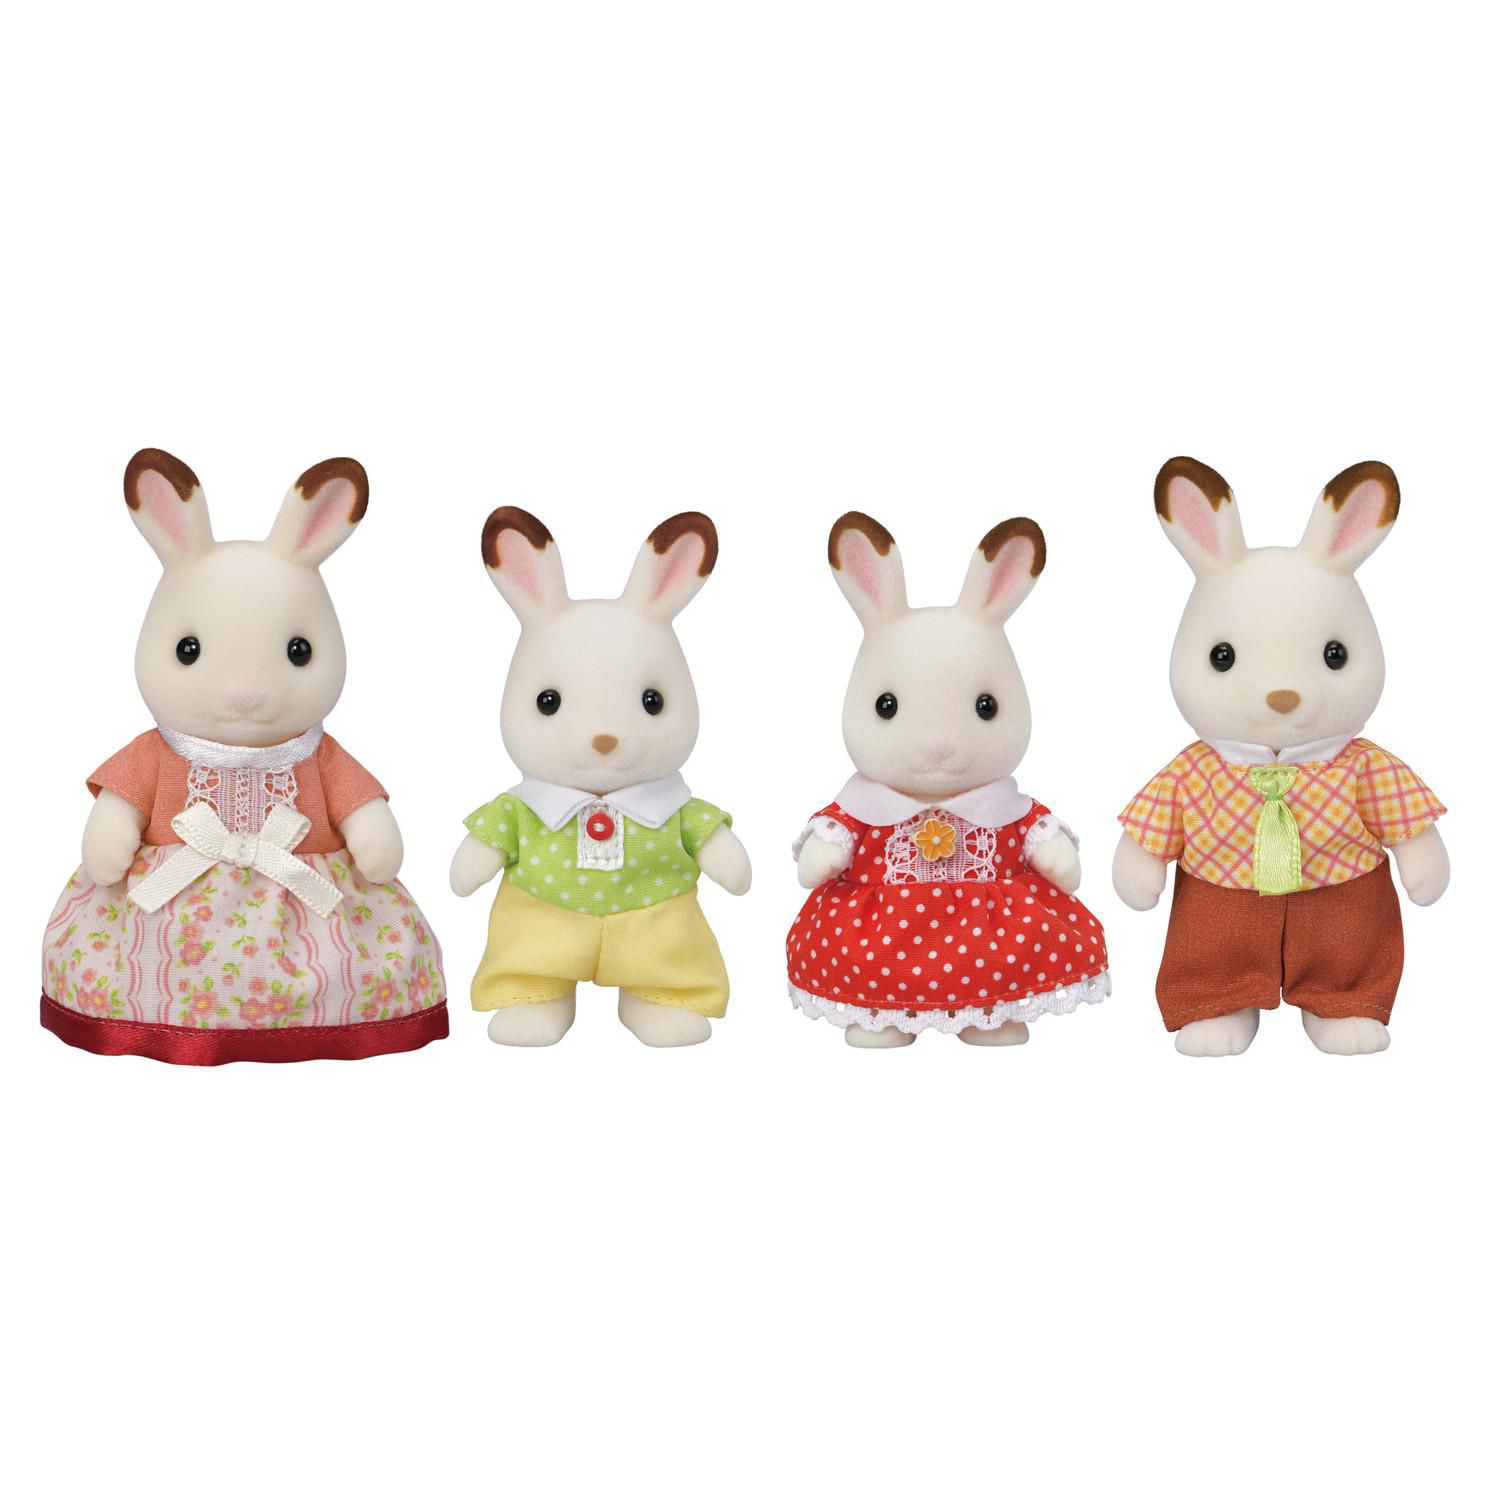 Calico Critters Chocolate Rabbit Family, Set of 4 Collectible Doll